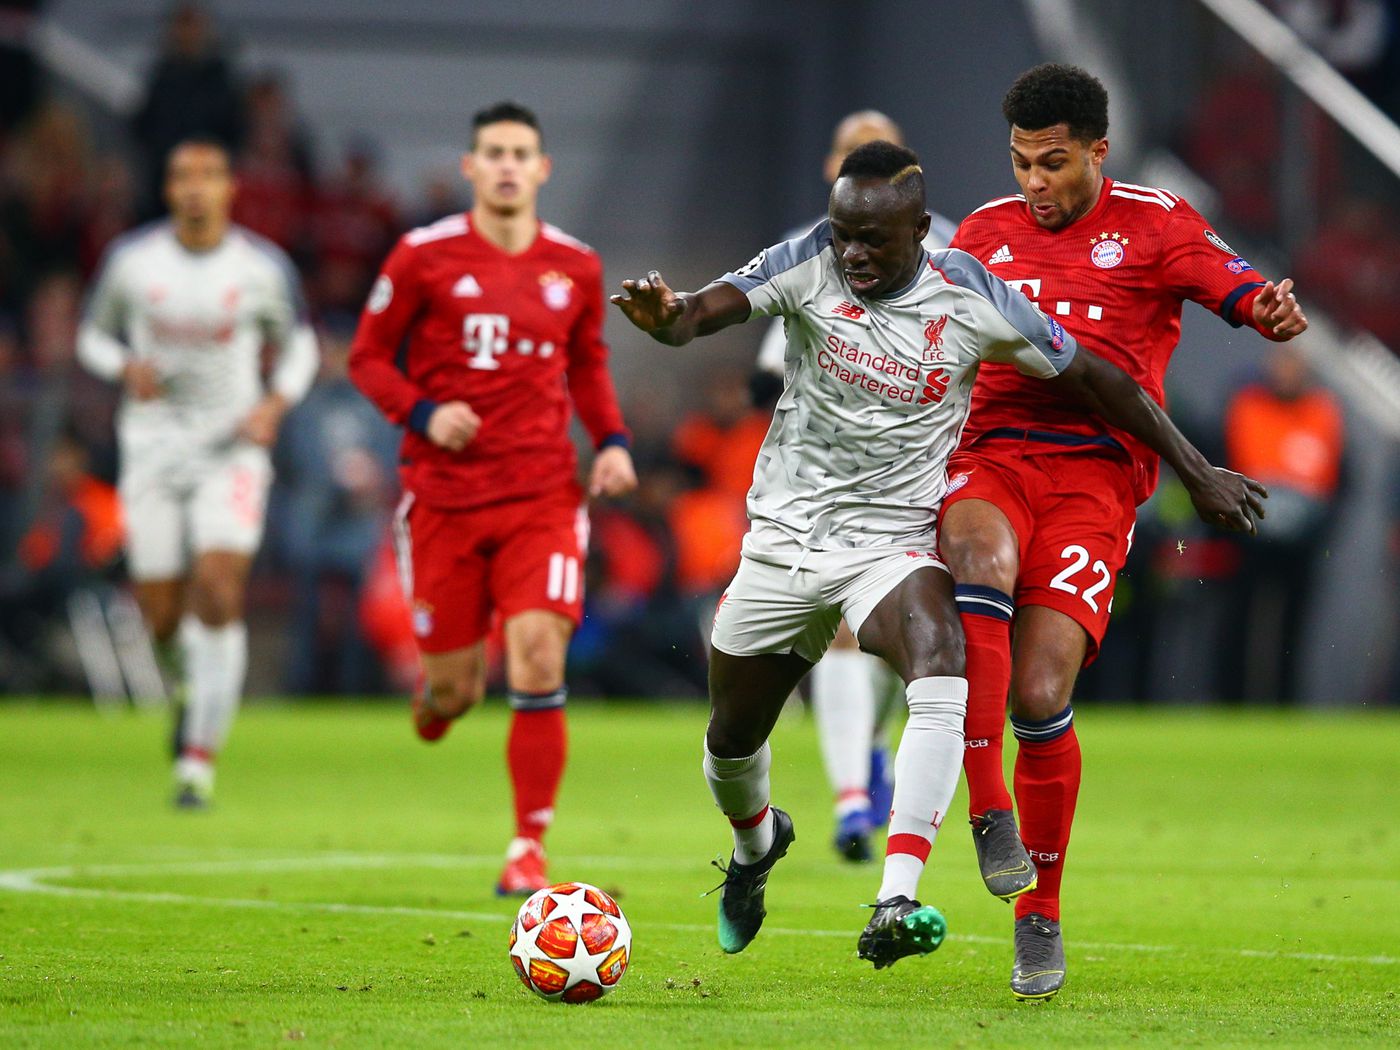 Bundesliga 2022/23: Liverpool forward Sadio Mane arrives in Germany ahead of Bayern Munich medical, Senegalese to be unveiled on Wednesday - Check out pictures